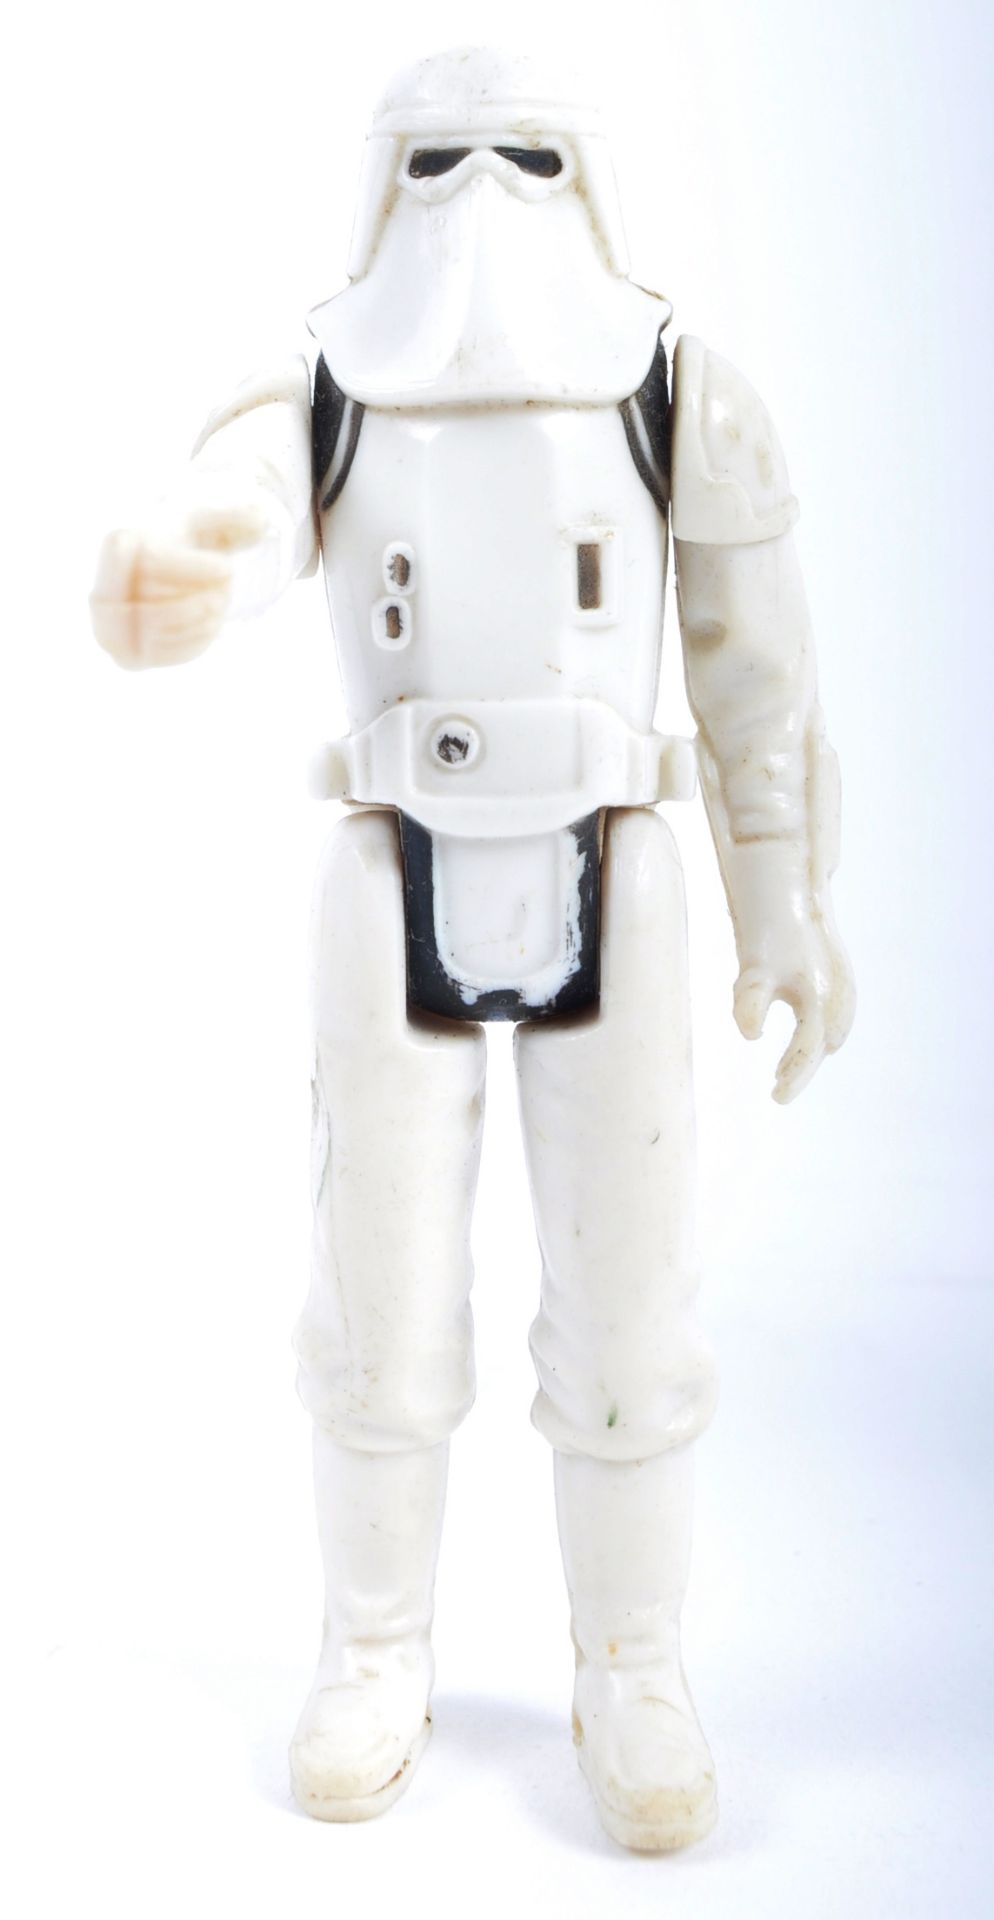 COLLECTION OF ORIGINAL MALITOY / KENNER STARWARS FIGURES - Image 5 of 6